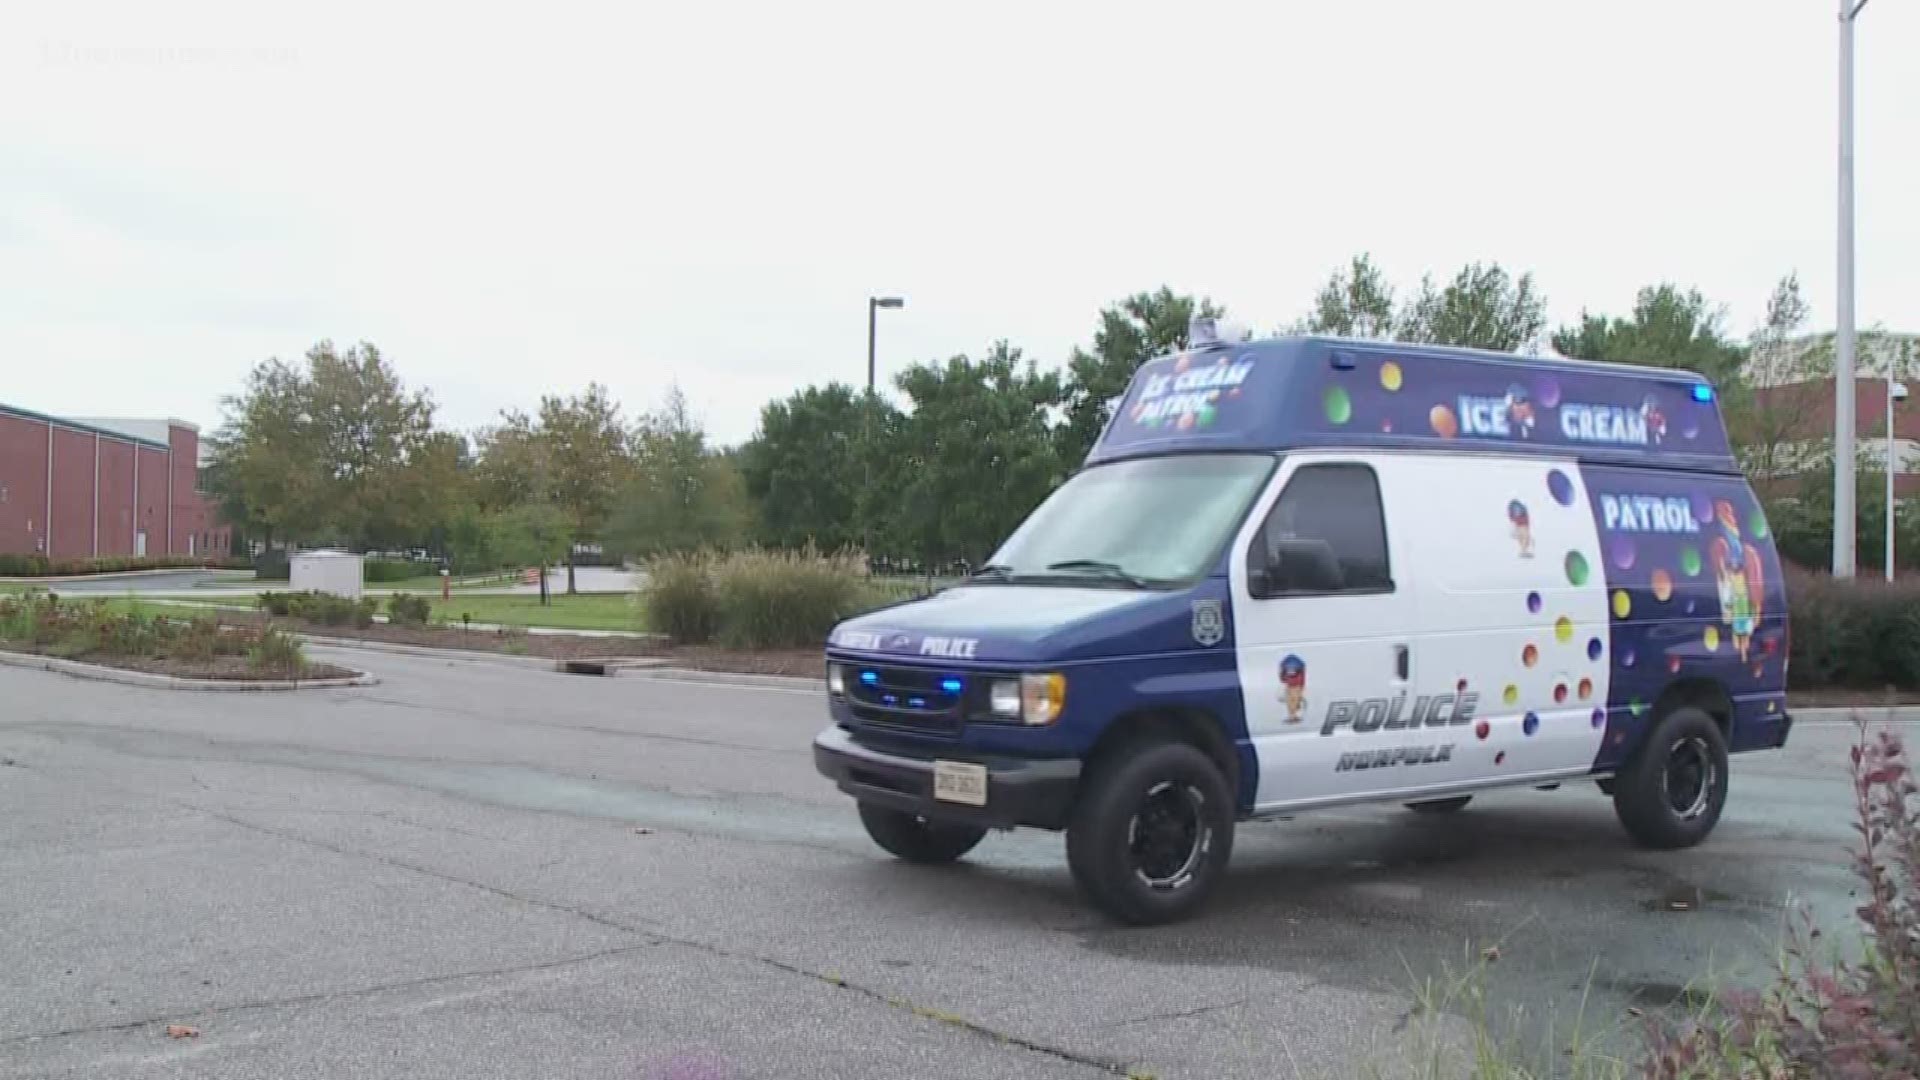 The Norfolk Police Department is debuting an ice cream truck on Saturday. The goal of the truck is to engage with the community and they hope it will prevent crime before it happens.